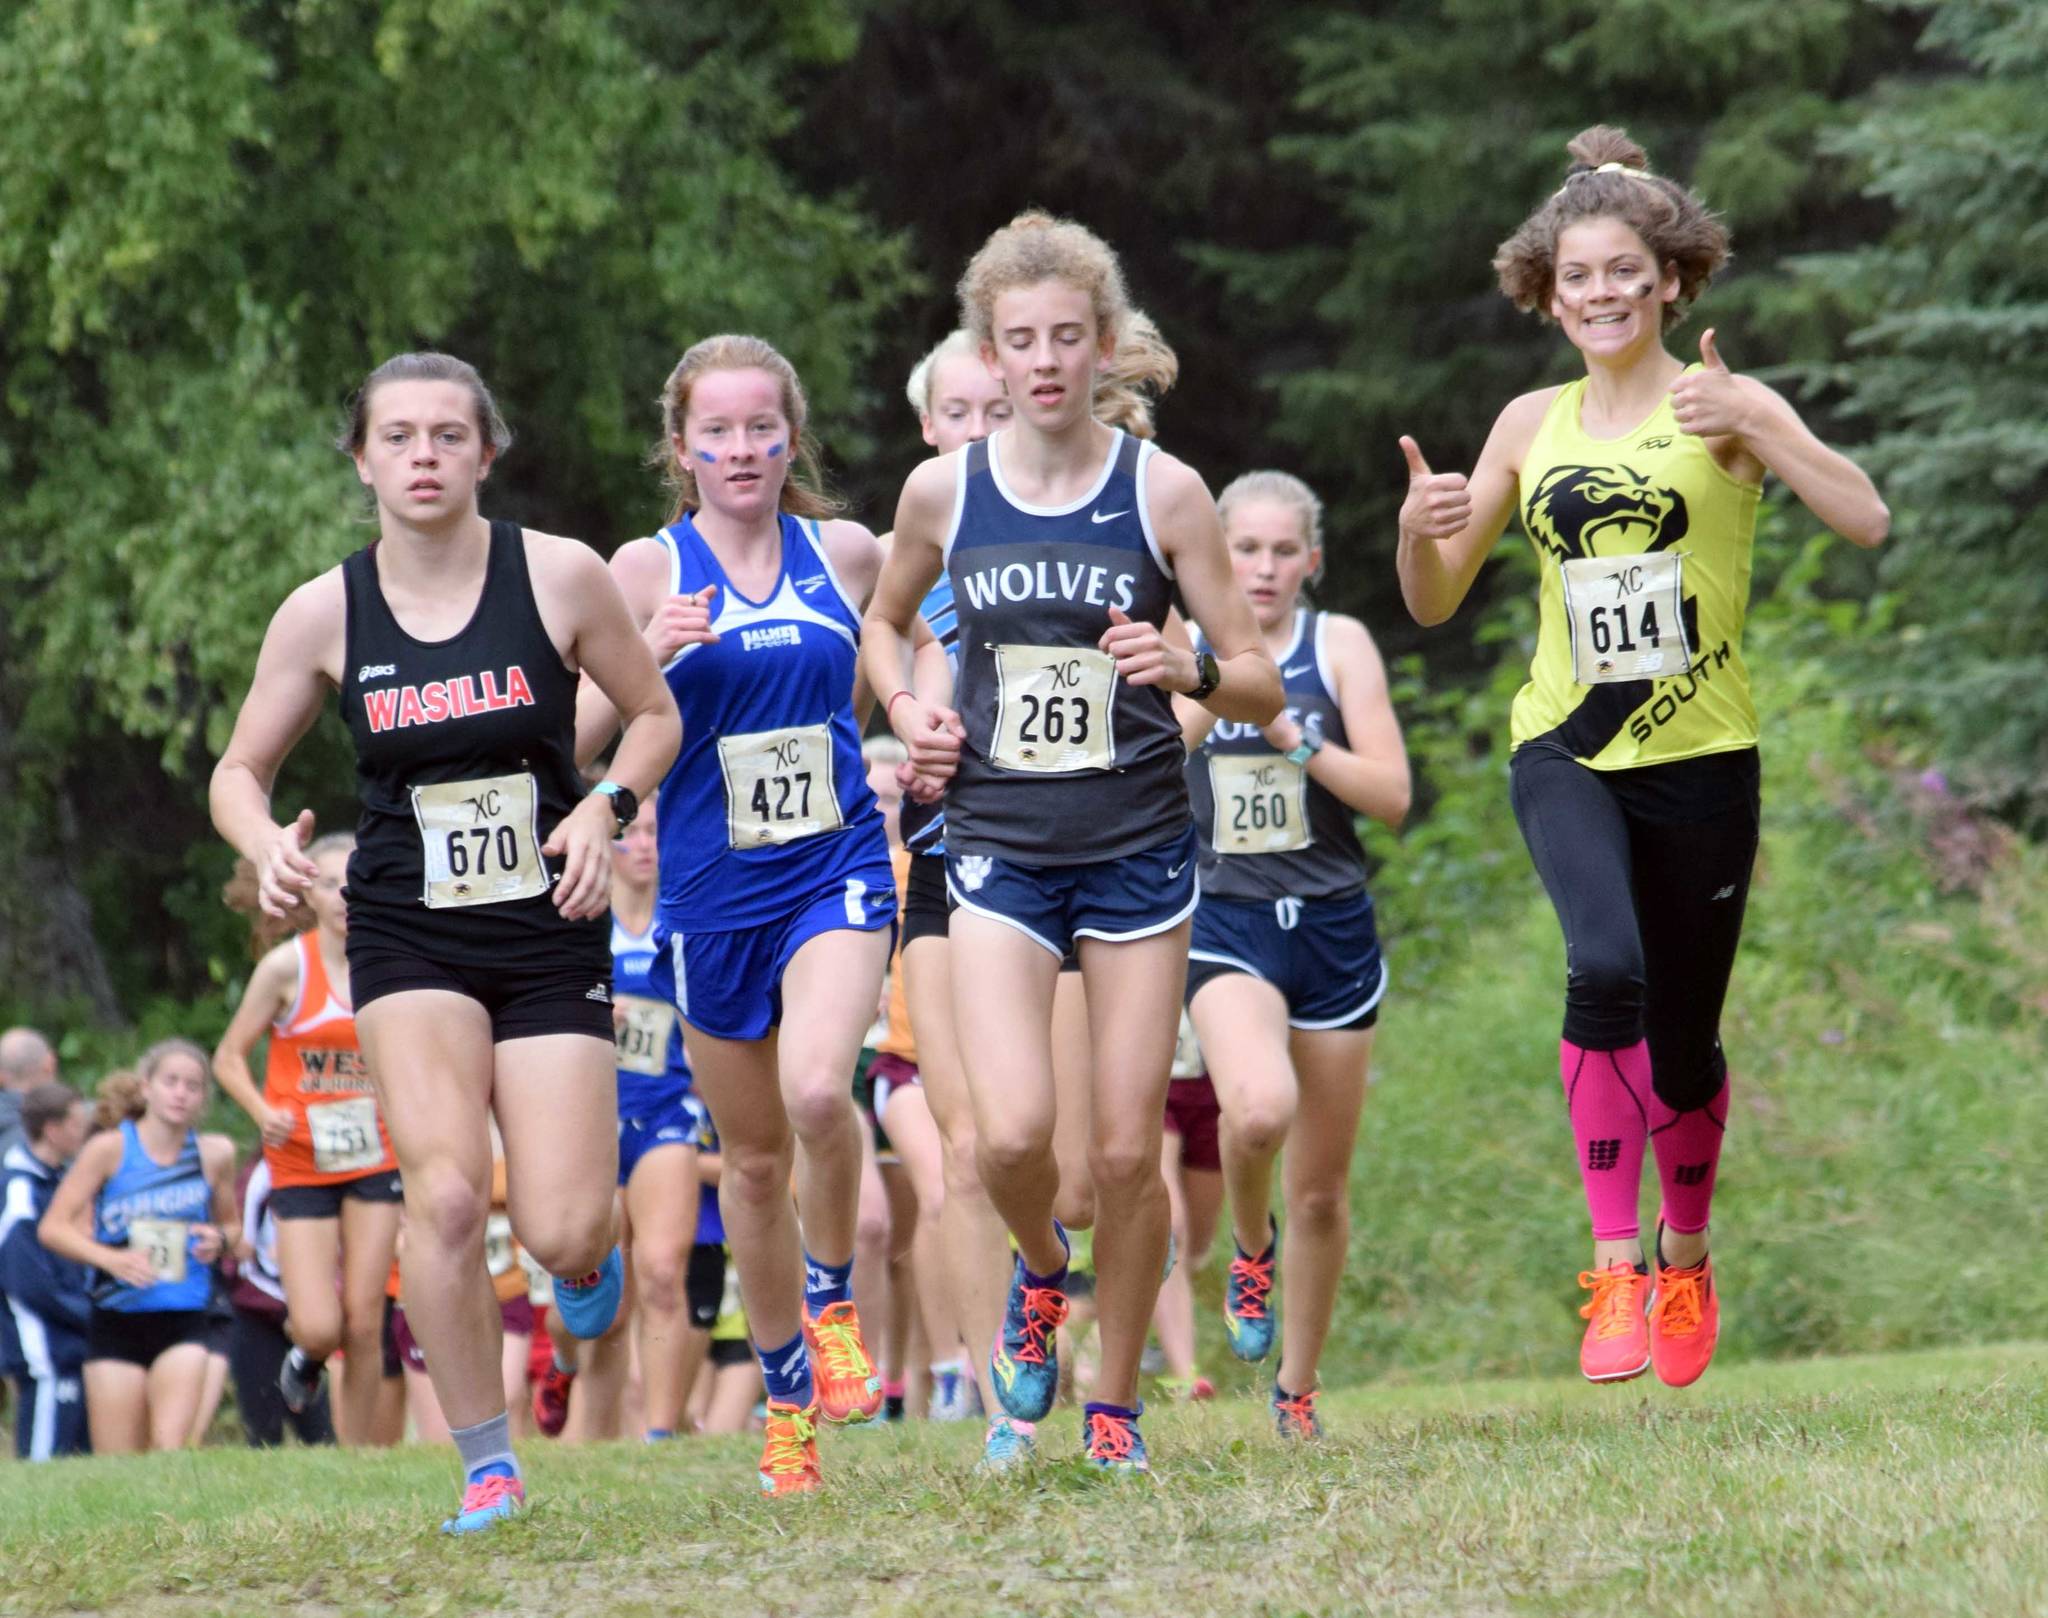 South’s Ava Earl, the eventual winner at far right, gives the thumbs up early in the Tsalteshi Invitational girls varsity race Saturday, Aug. 18, 2018, at Tsalteshi Trails. Running with Earl are Wasilla’s Allison VanPelt, Palmer’s Katey Houser and Eagle River’s Emily Walsh. (Photo by Jeff Helminiak/Peninsula Clarion)